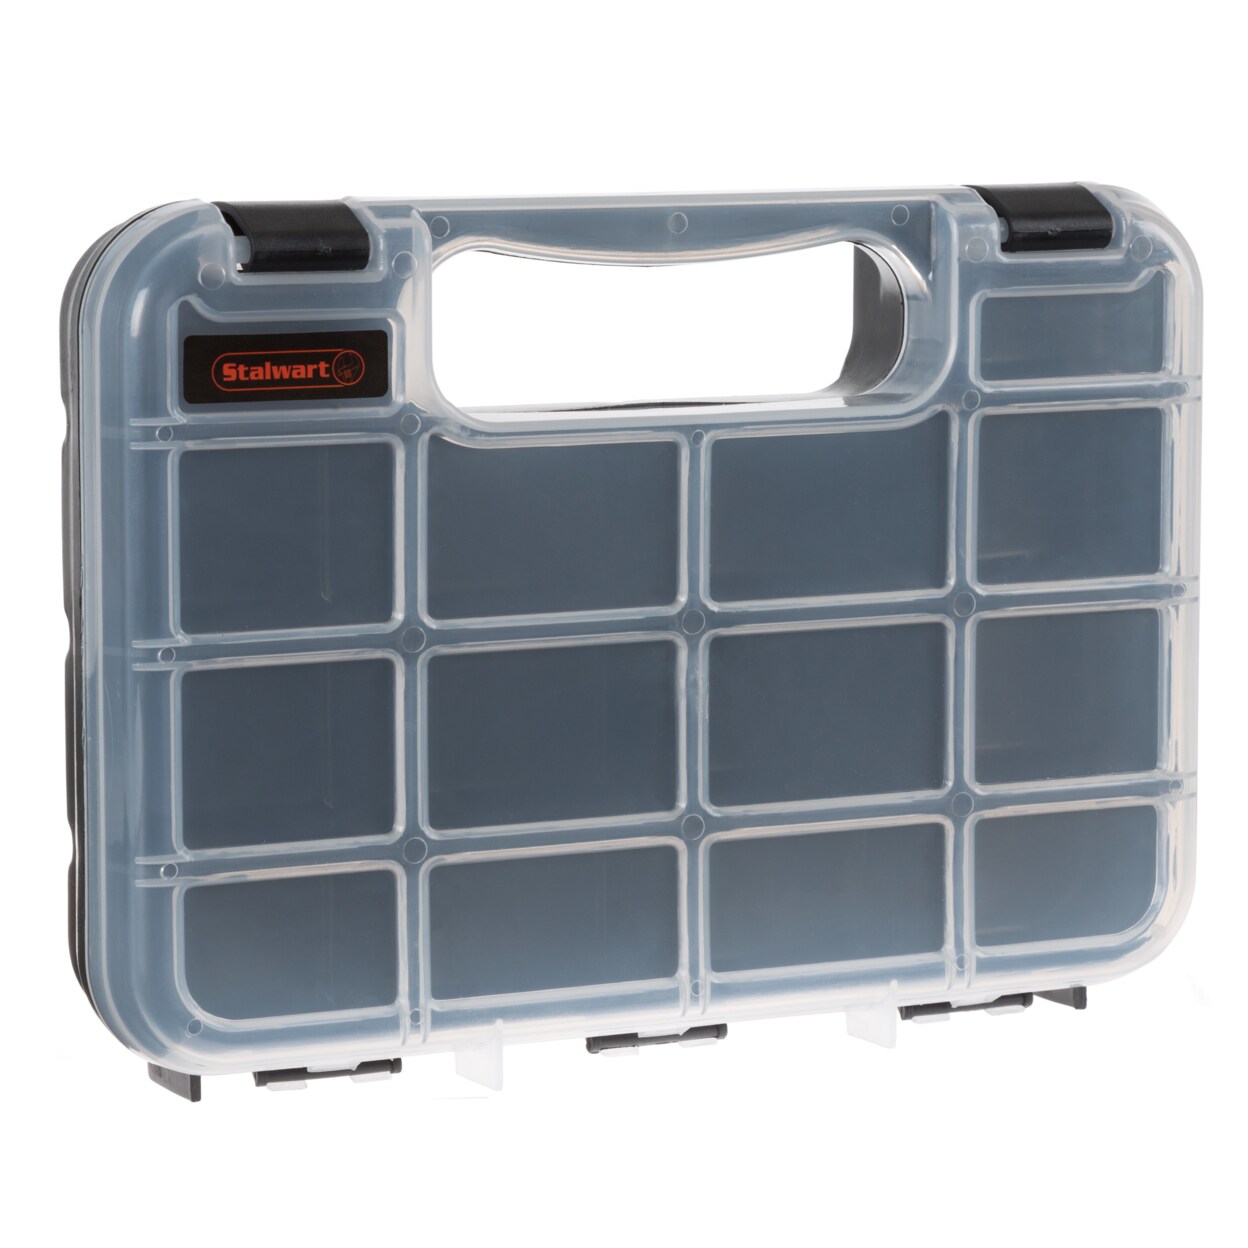 Stalwart Portable Storage Case with Secure Locks 14 Small Bin Compartments Crafts Beads Jewelry